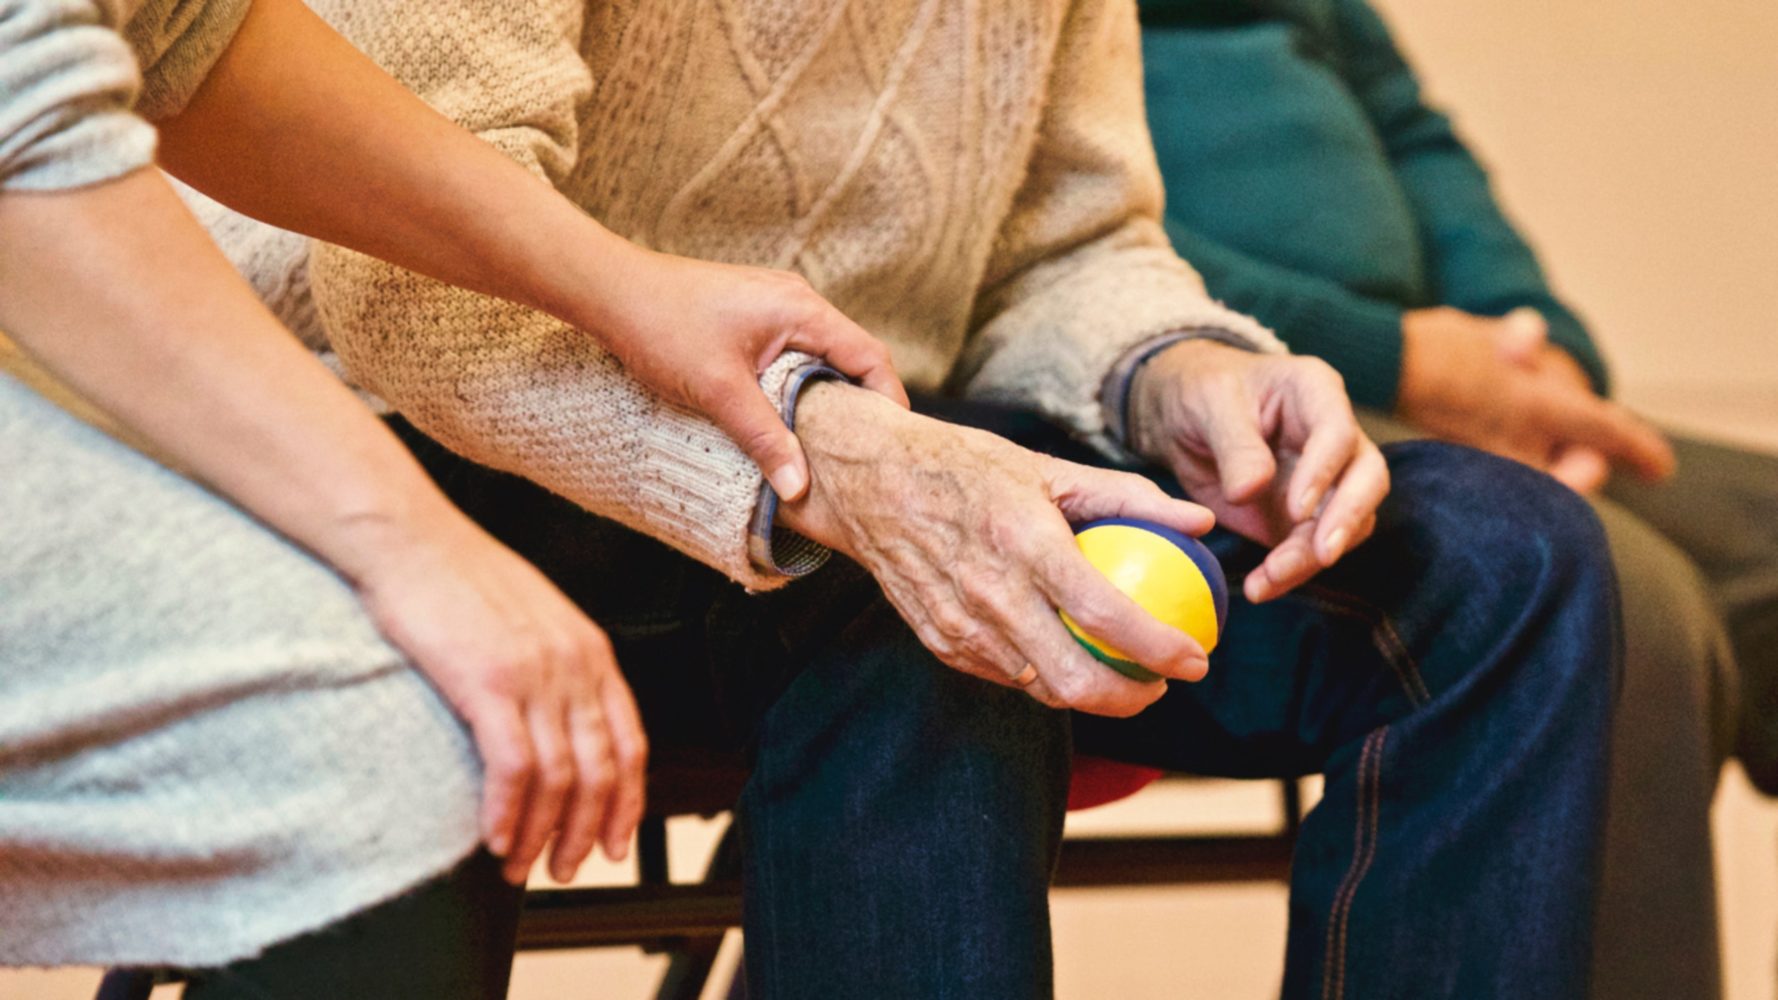 Image of senior's hand using a stress ball while receiving emotional support from a relative